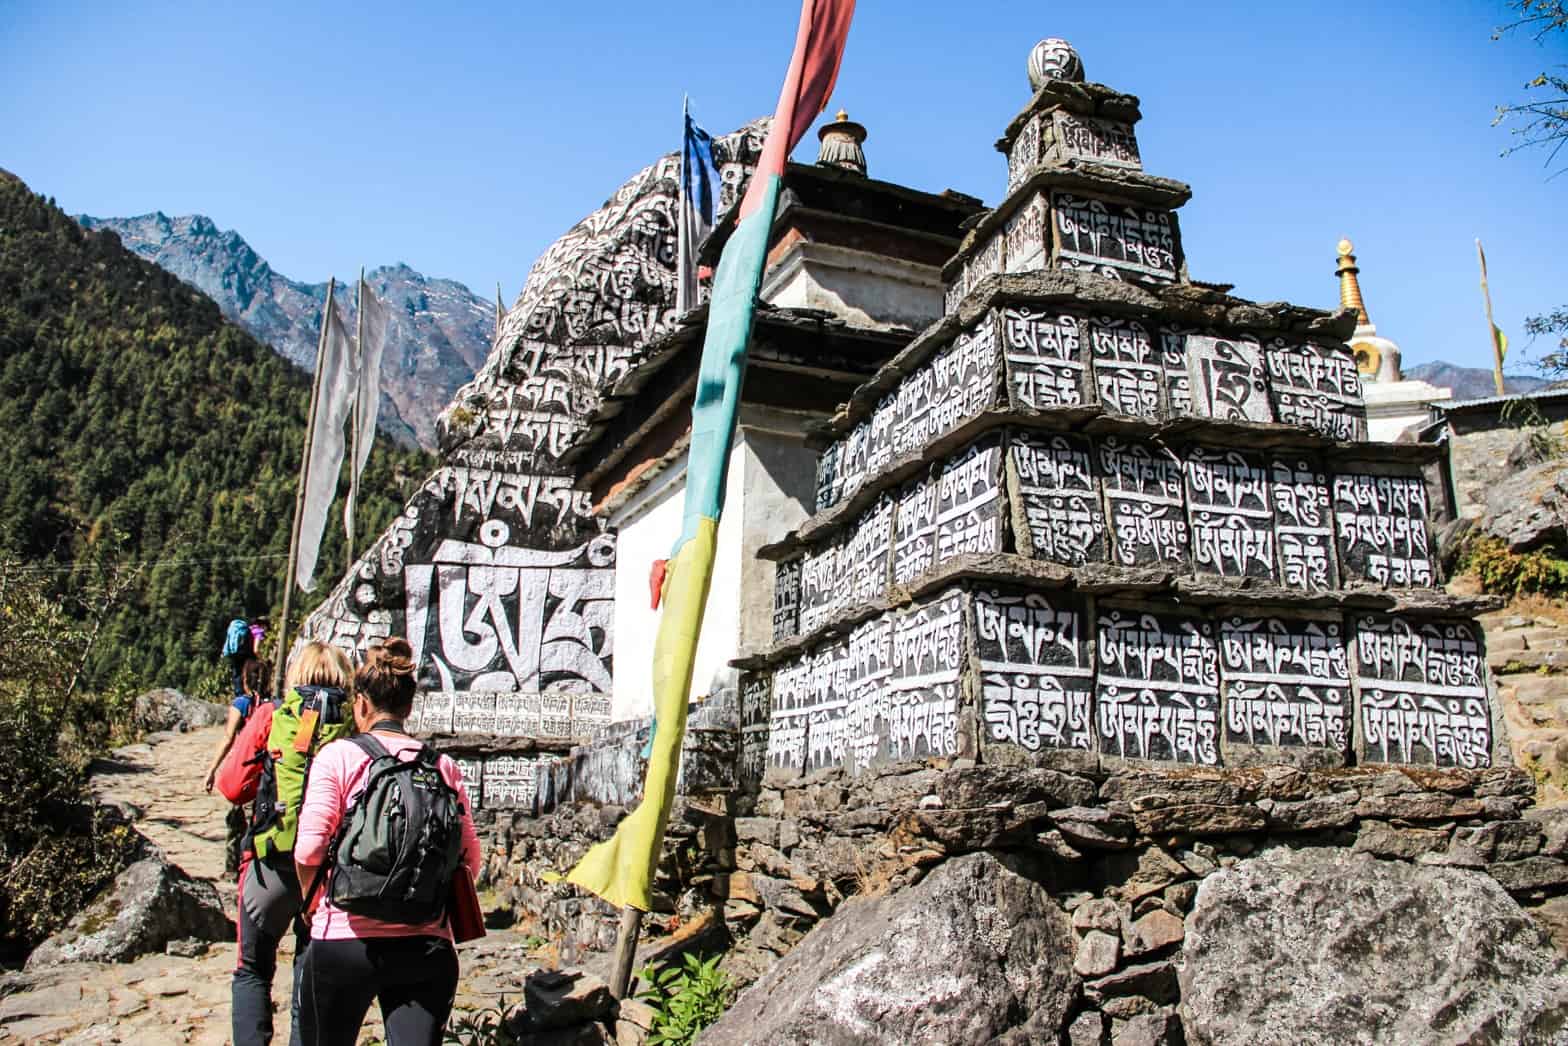 Hikers on the Everest Base Camp trek pass a sacred monument in the mountains - a tiered temple structure with black painted panels featured white painted script. Multi-coloured prayer flags hang next to the temple. 